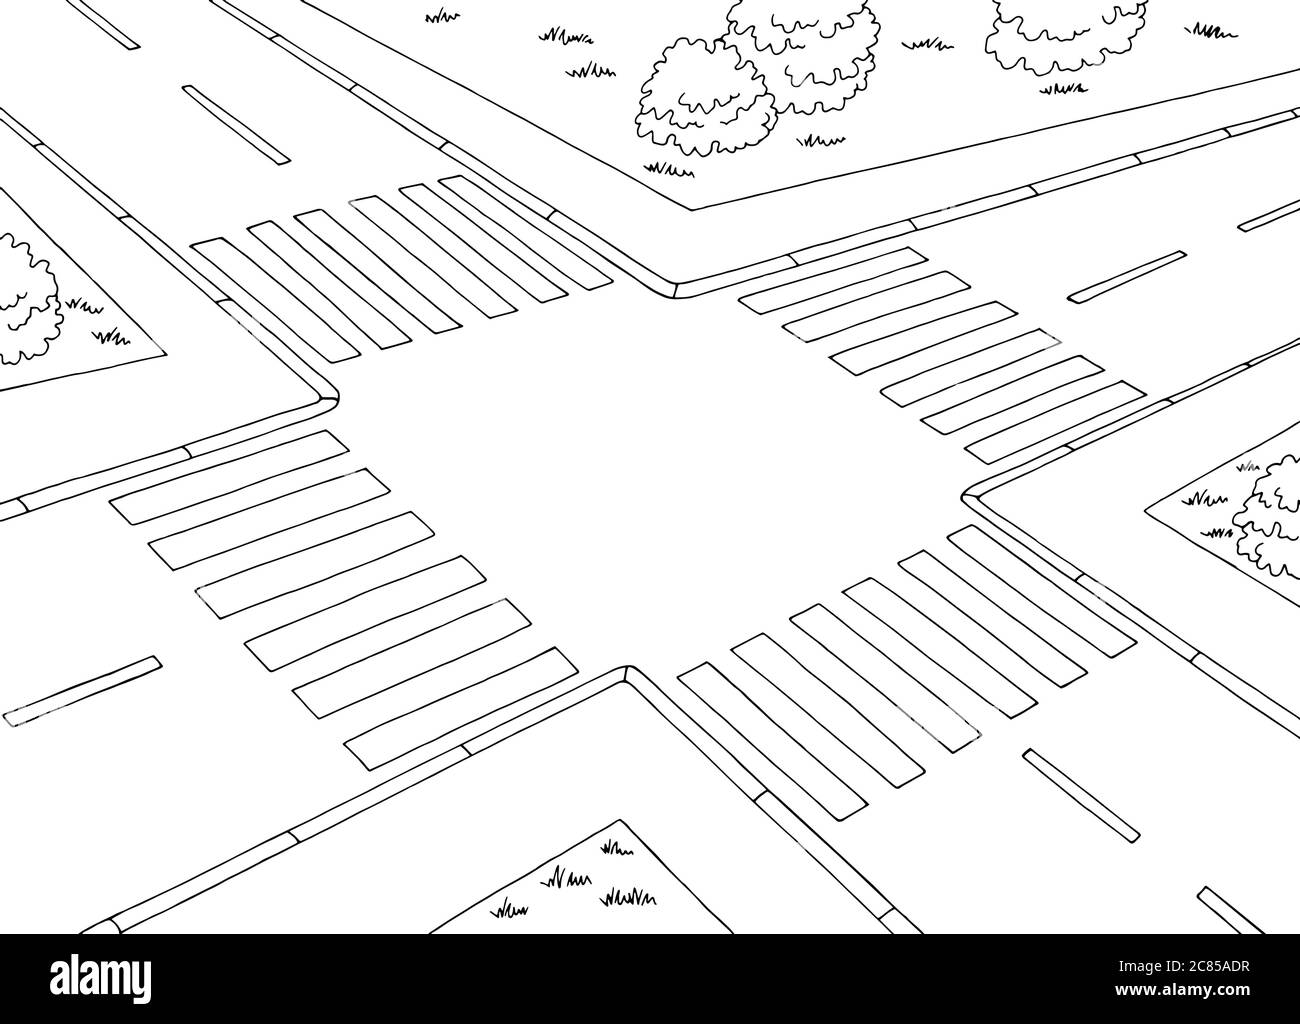 Crossroad street graphic black white sketch aerial view landscape illustration vector Stock Vector